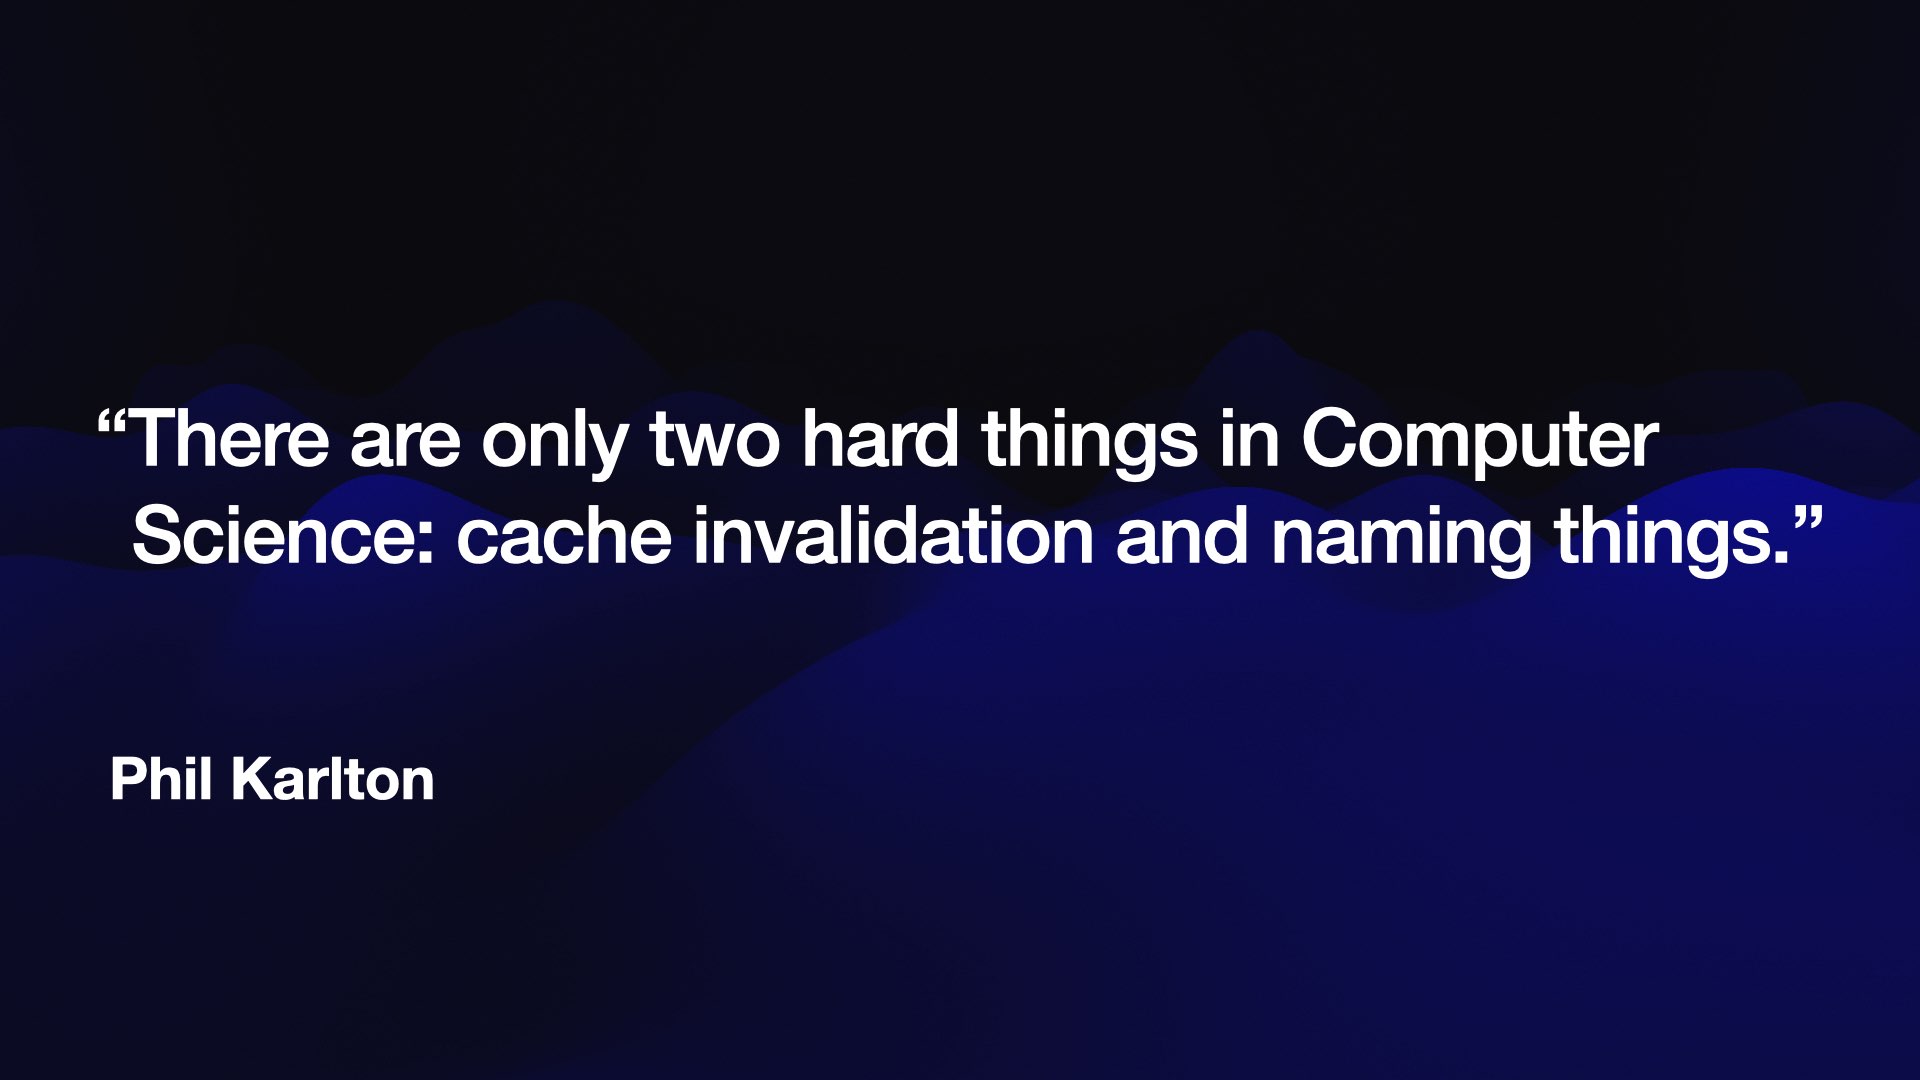 “There are only two hard things in Computer Science: cache invalidation and naming things.”  Phil Karlton 